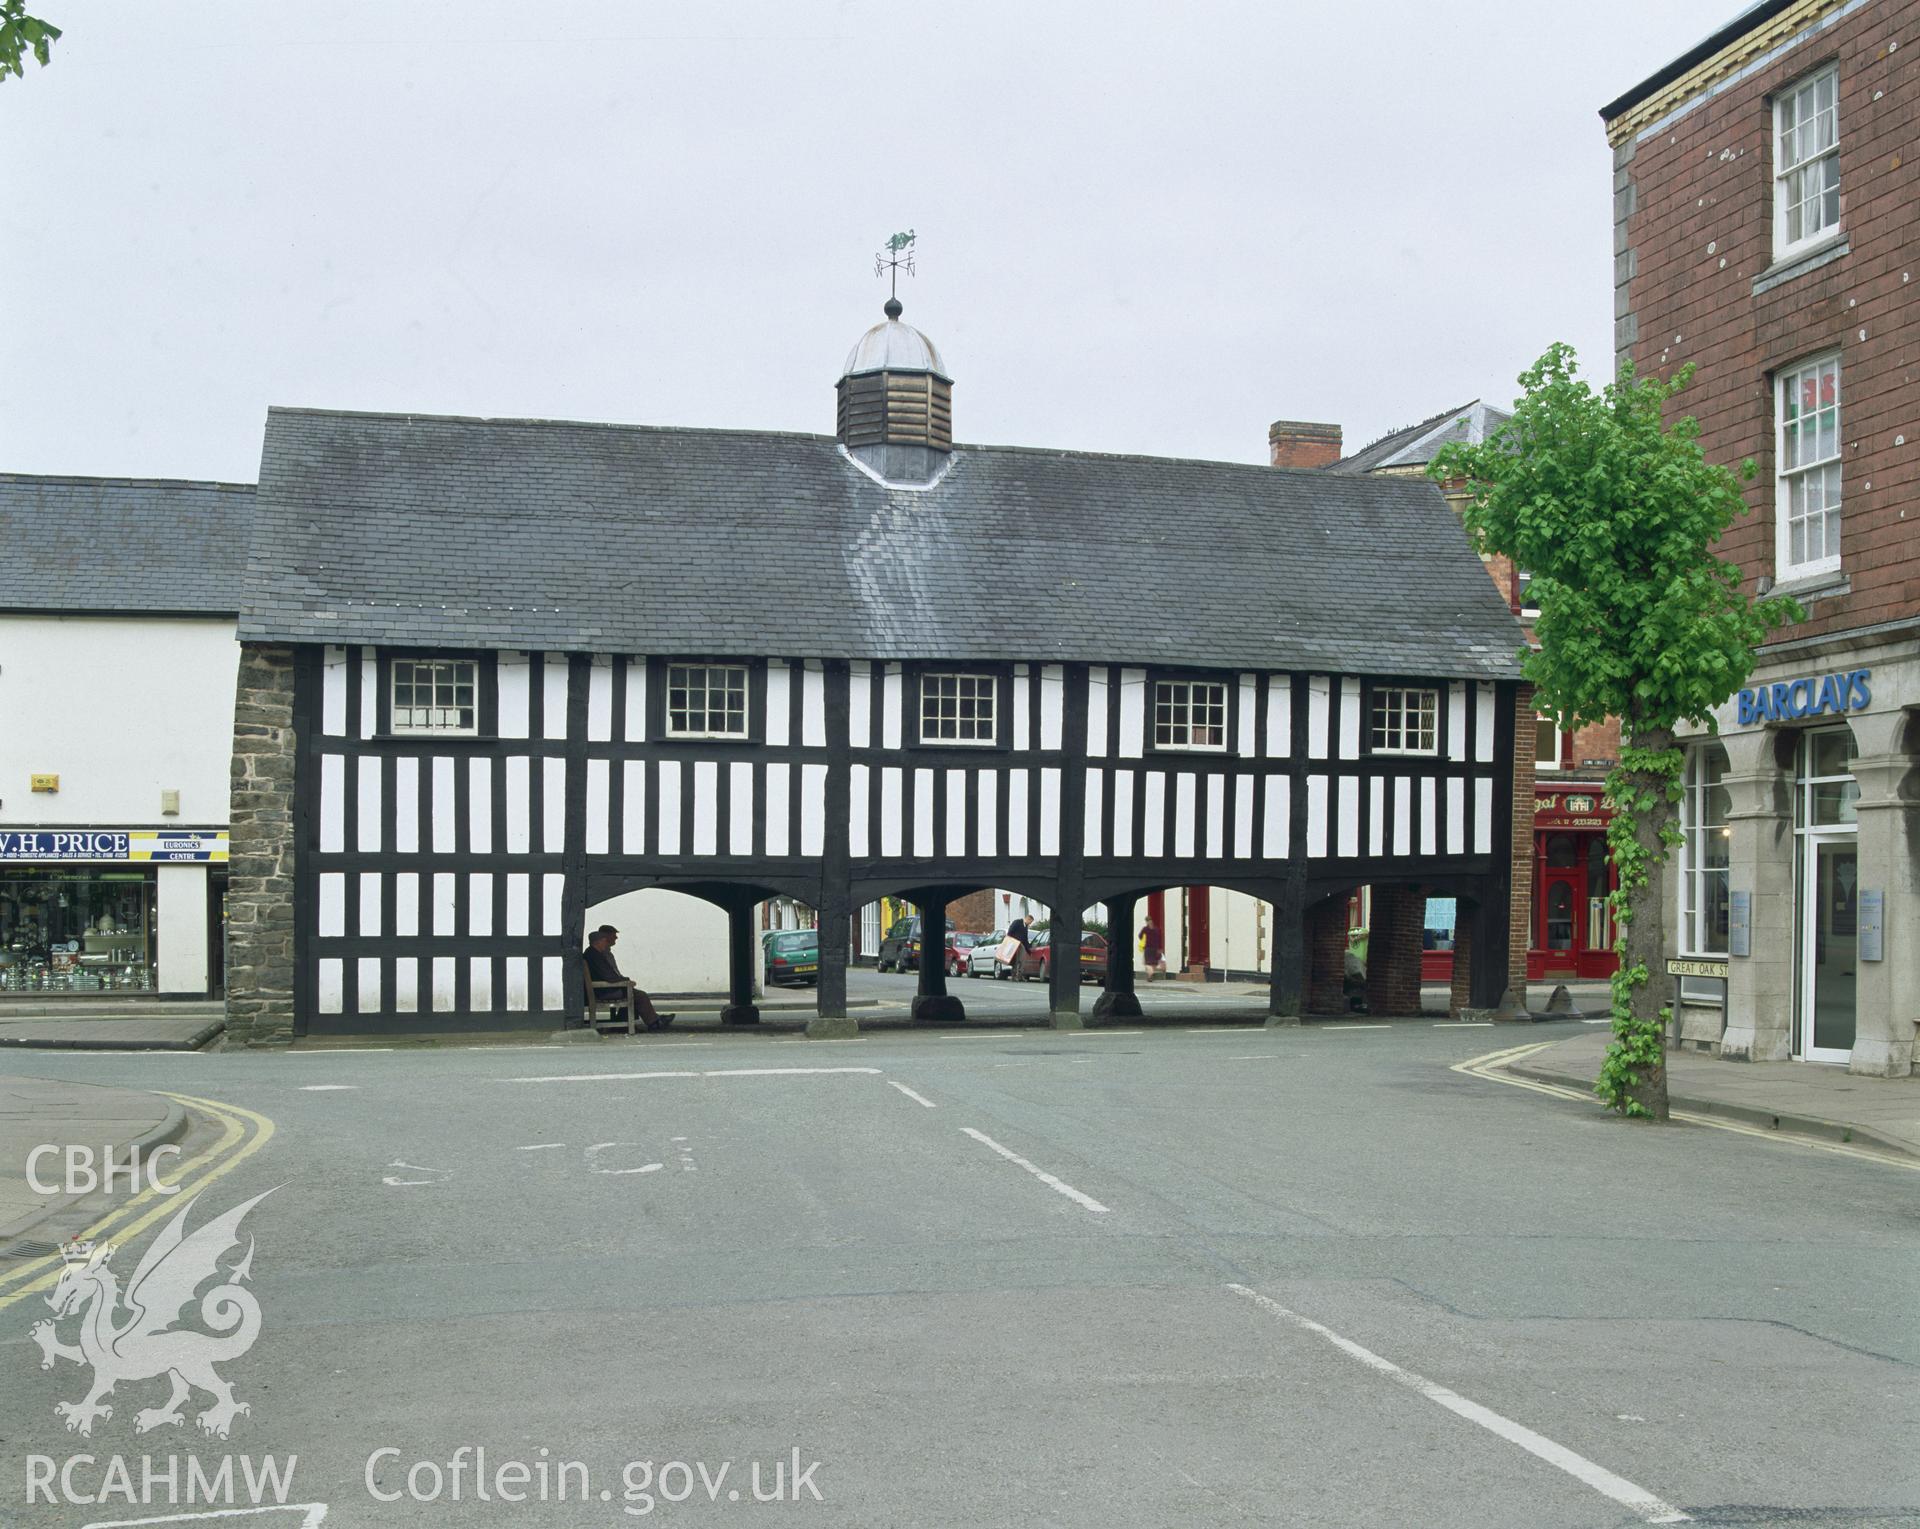 RCAHMW colour transparency showing the Old Market Hall, Llanidloes, taken by Iain Wright, May 2004